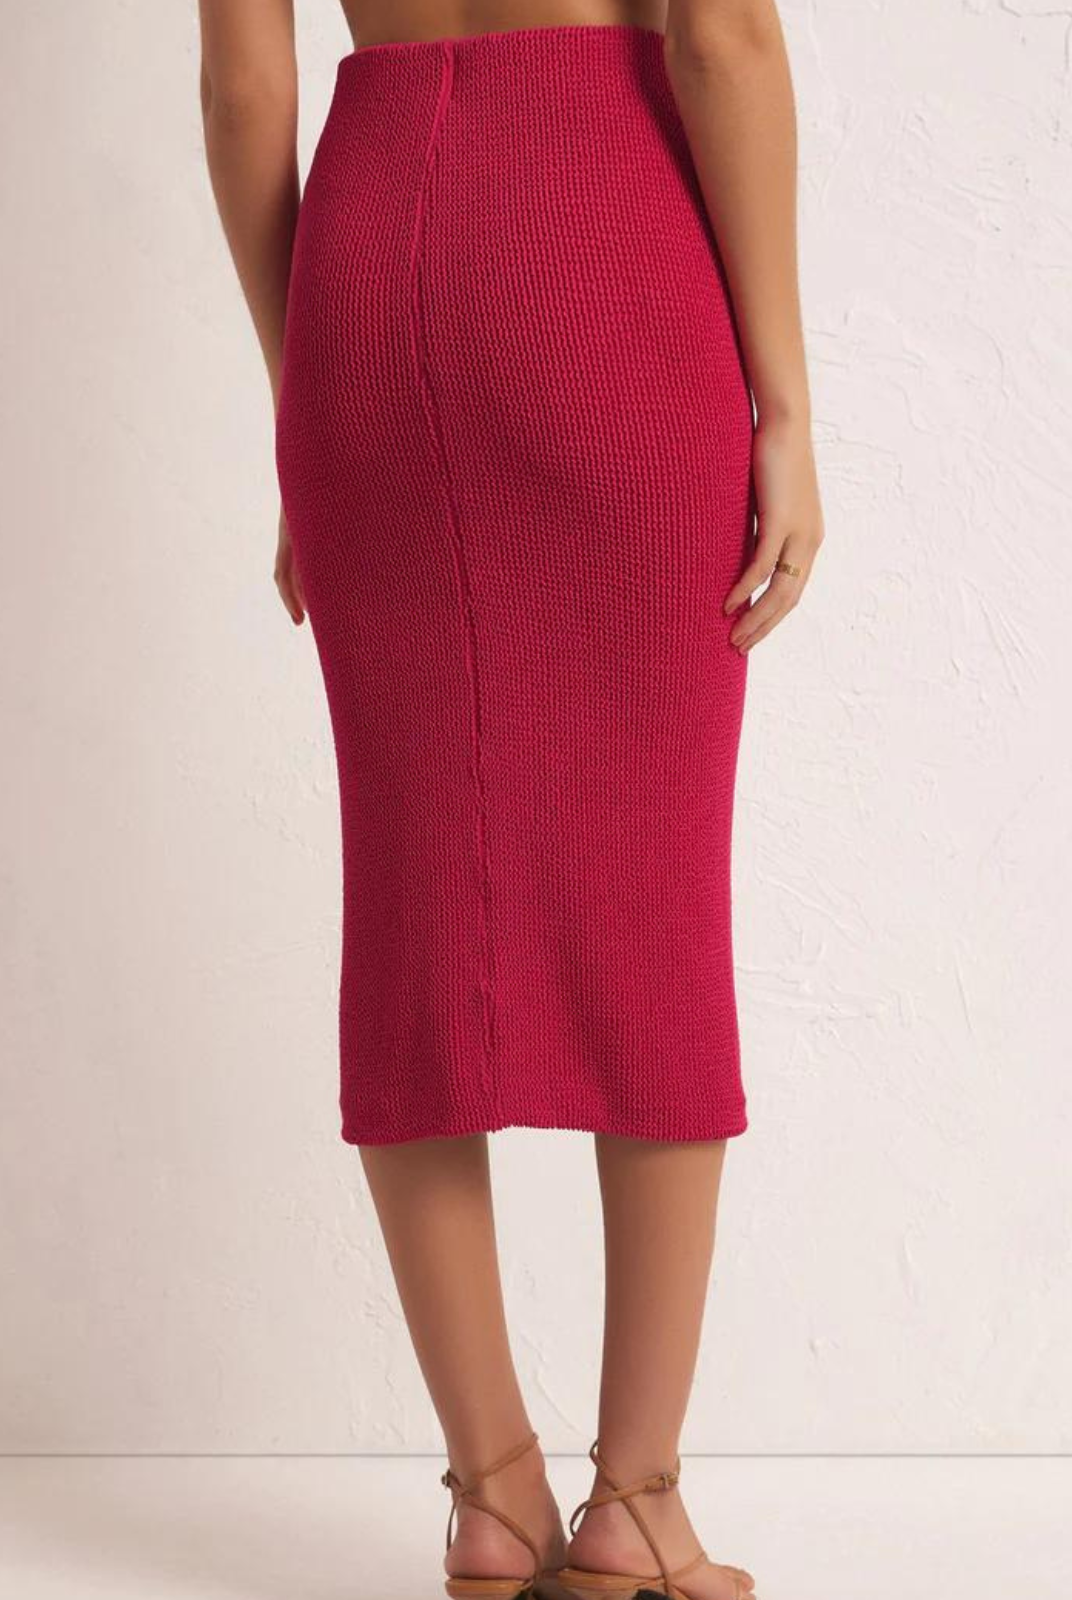 Z Supply Aveen Midi Skirt. Sleek and sultry, this midi will become your fave go-to, from interviews to nights out. The hidden elastic waistband makes this skirt easy to pull on and the mid-weight knit is made for everyday wear.